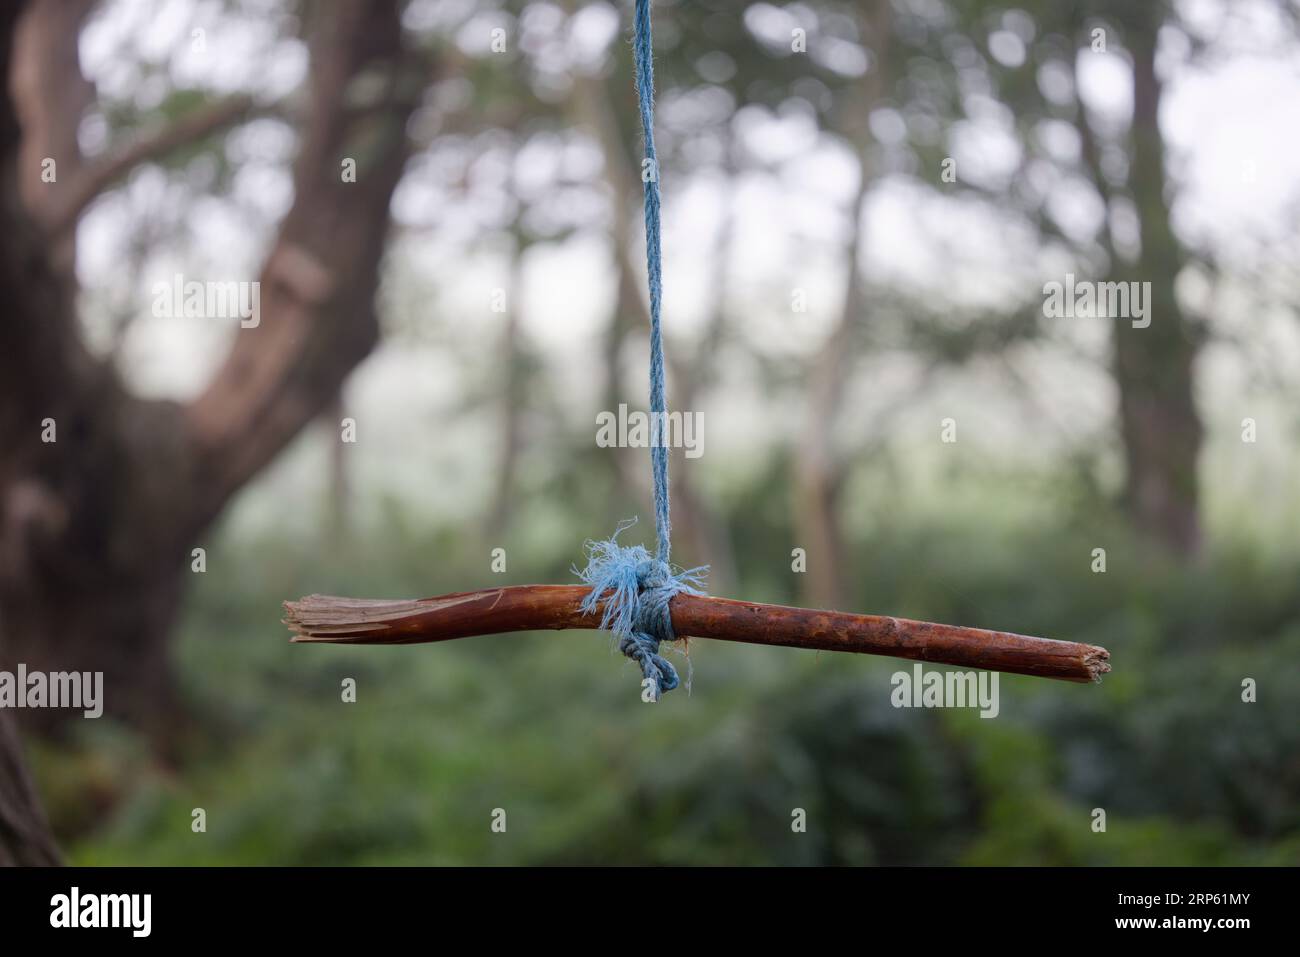 Piece of a branch that has been tied with blue rope to a tree to form a swing that children can swing on in the woodland Stock Photo